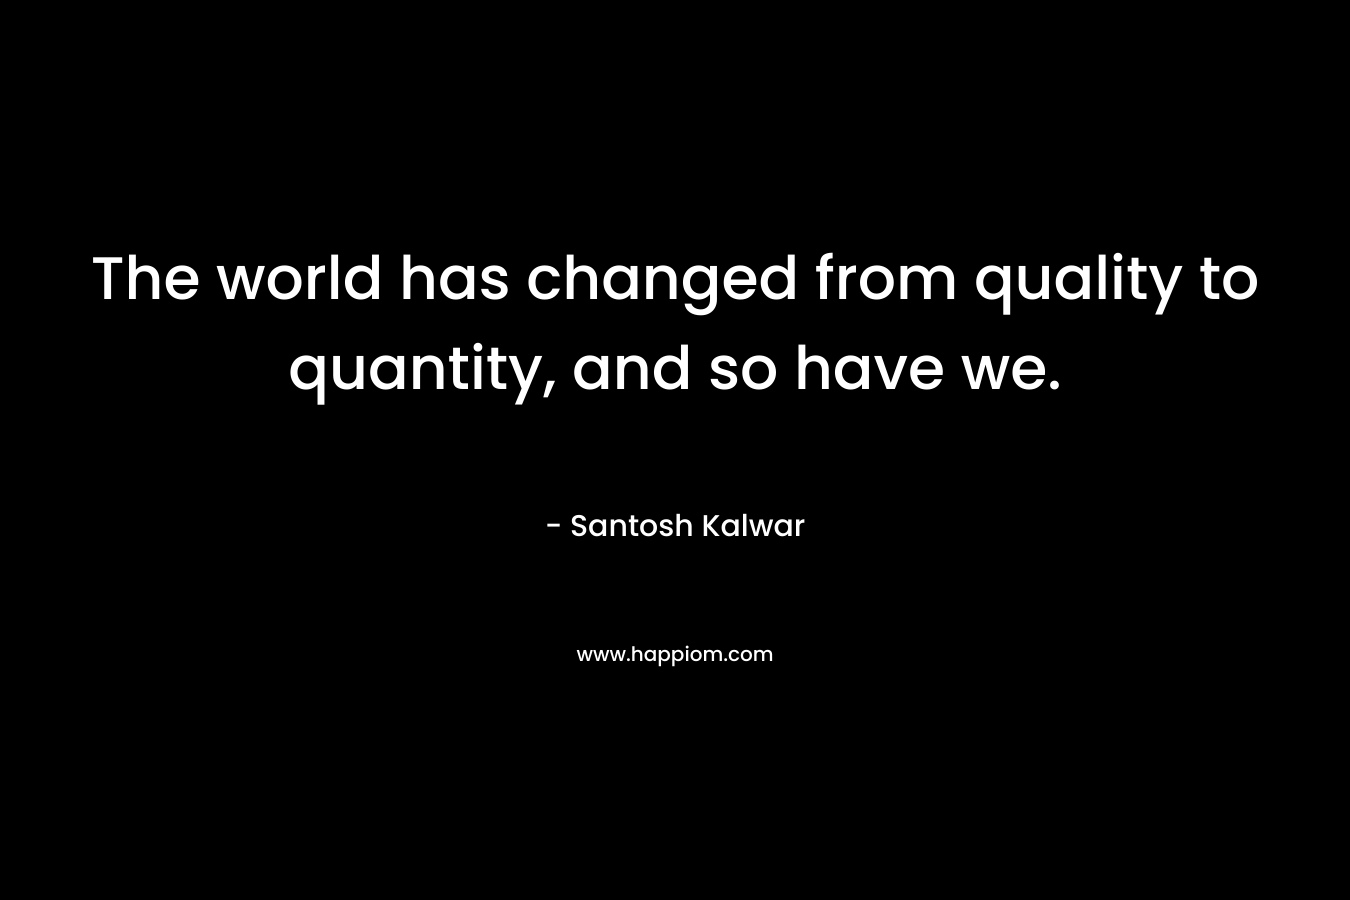 The world has changed from quality to quantity, and so have we.